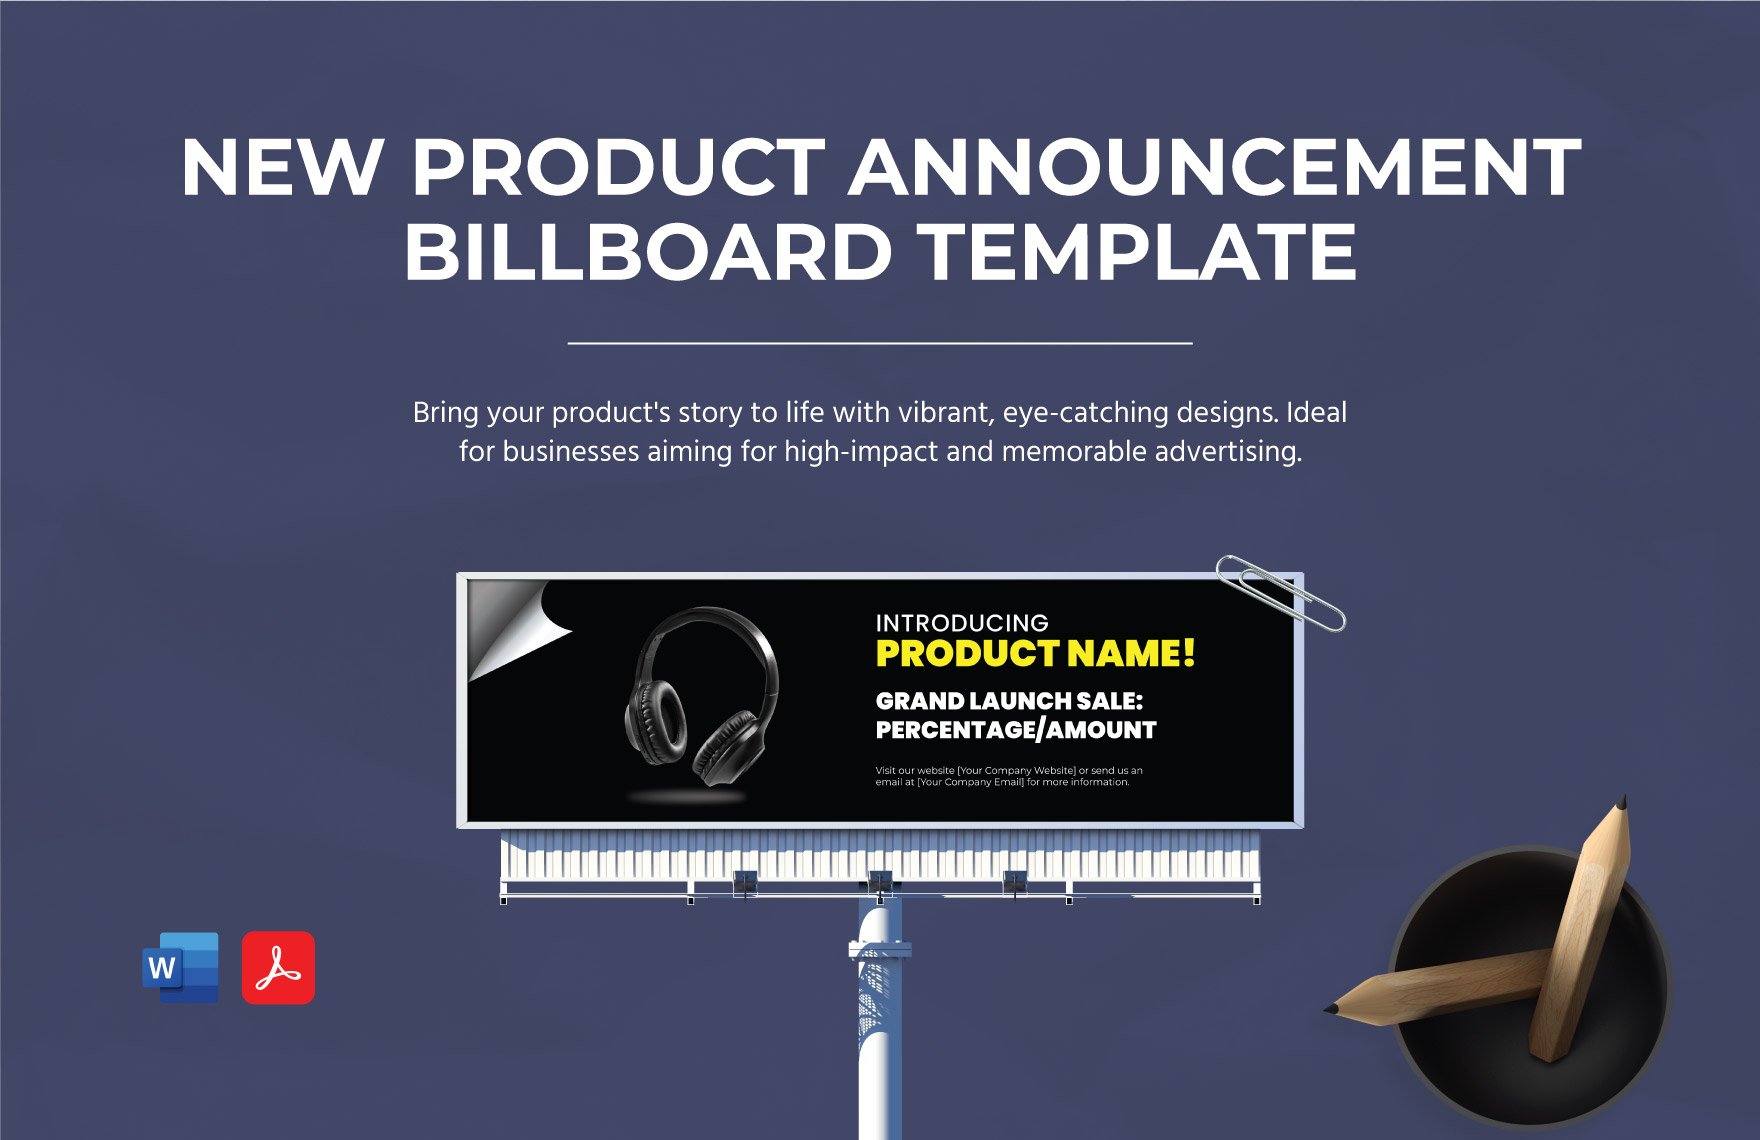 New Product Announcement Billboard Template